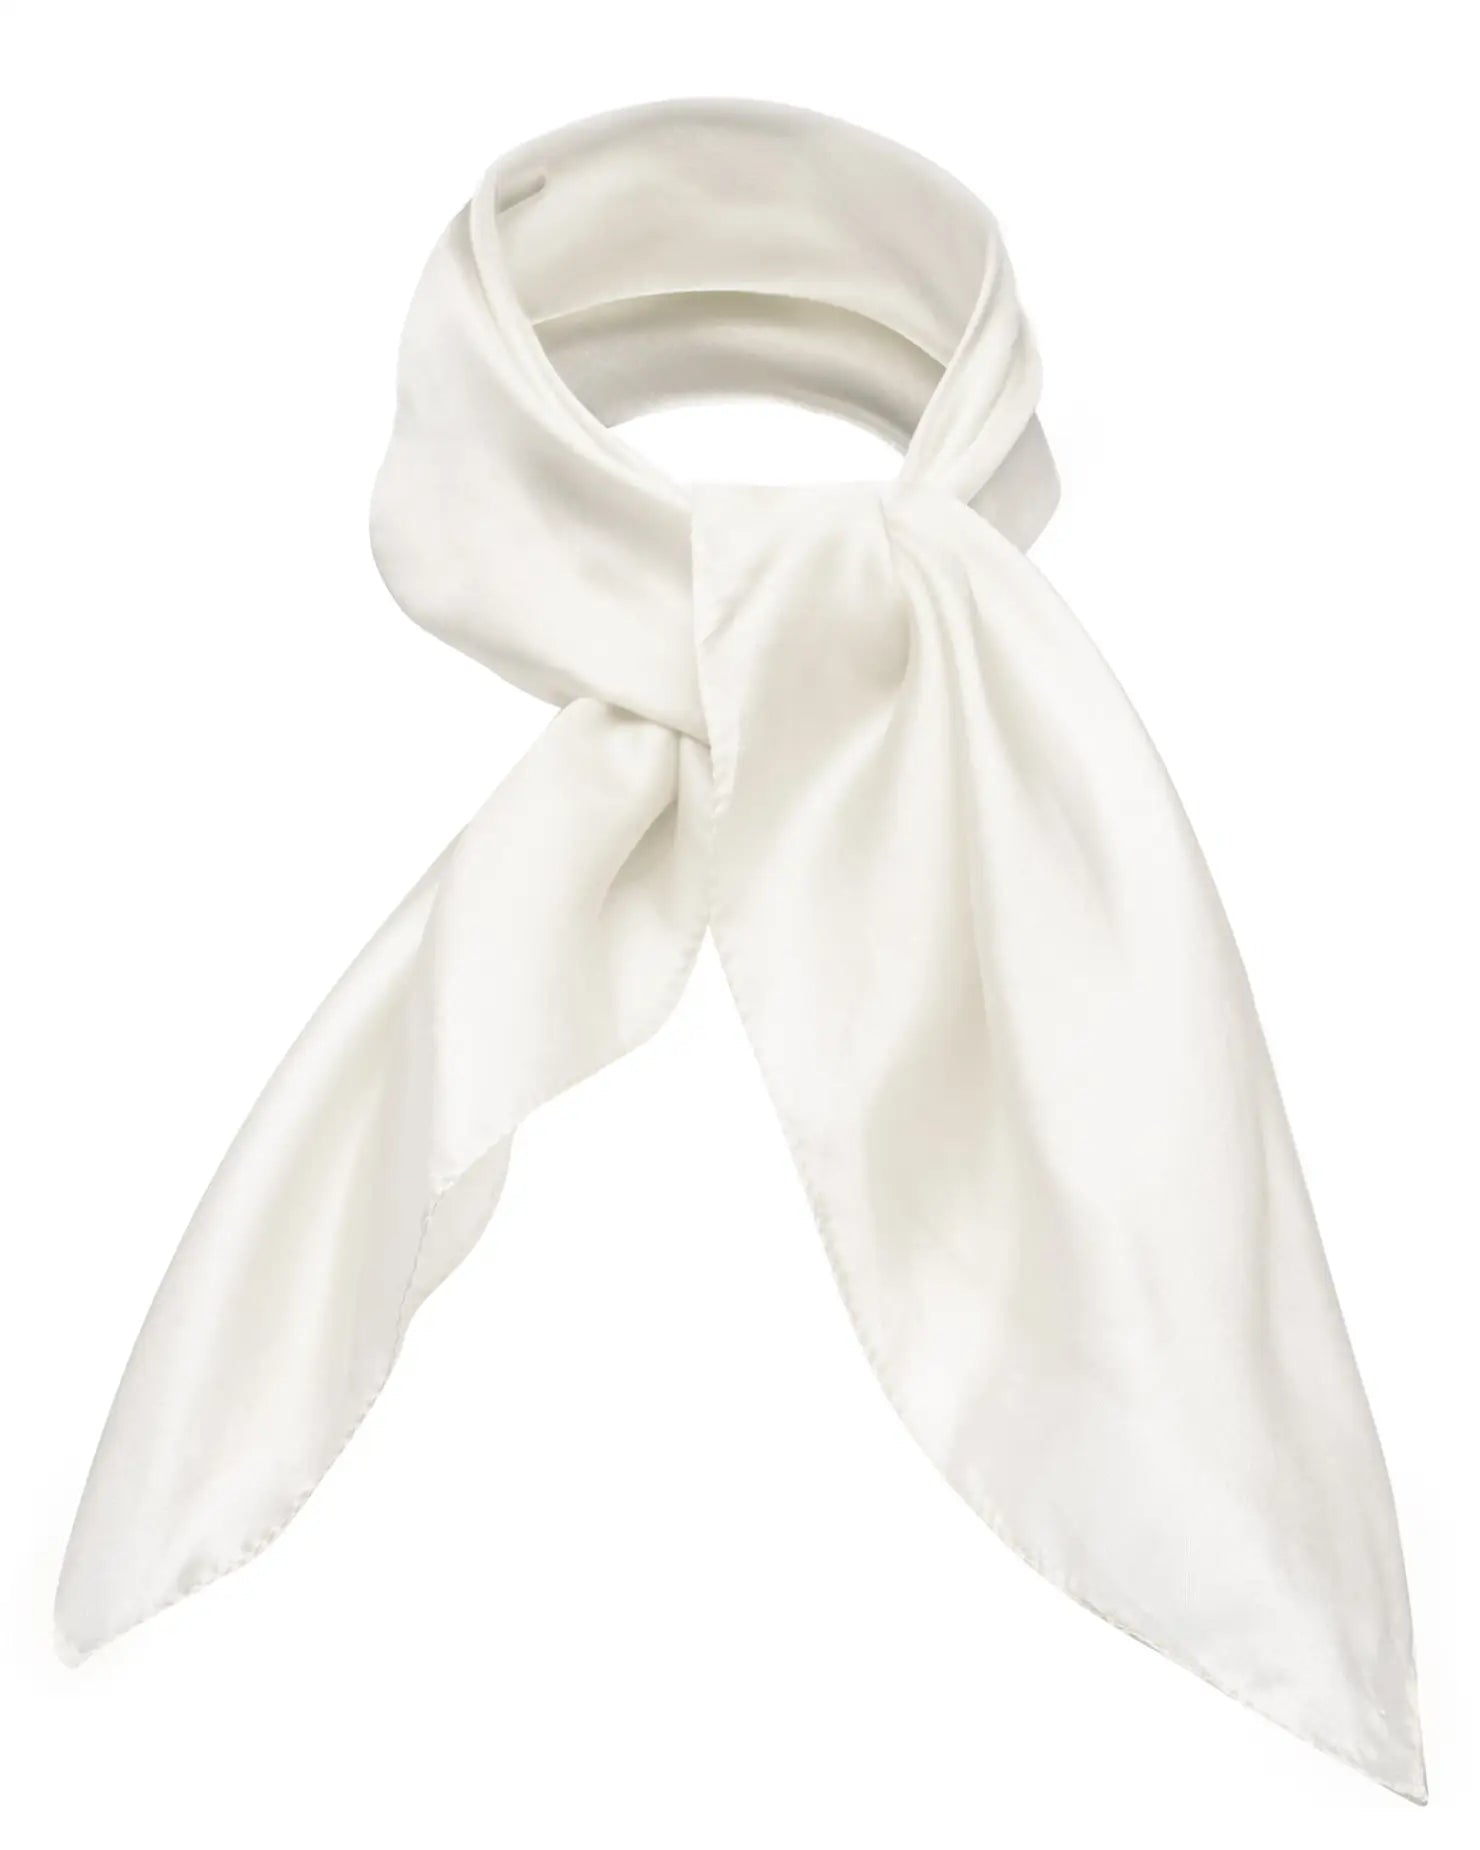 Luxurious 100% Mulberry Silk Small Square Scarf on White Background